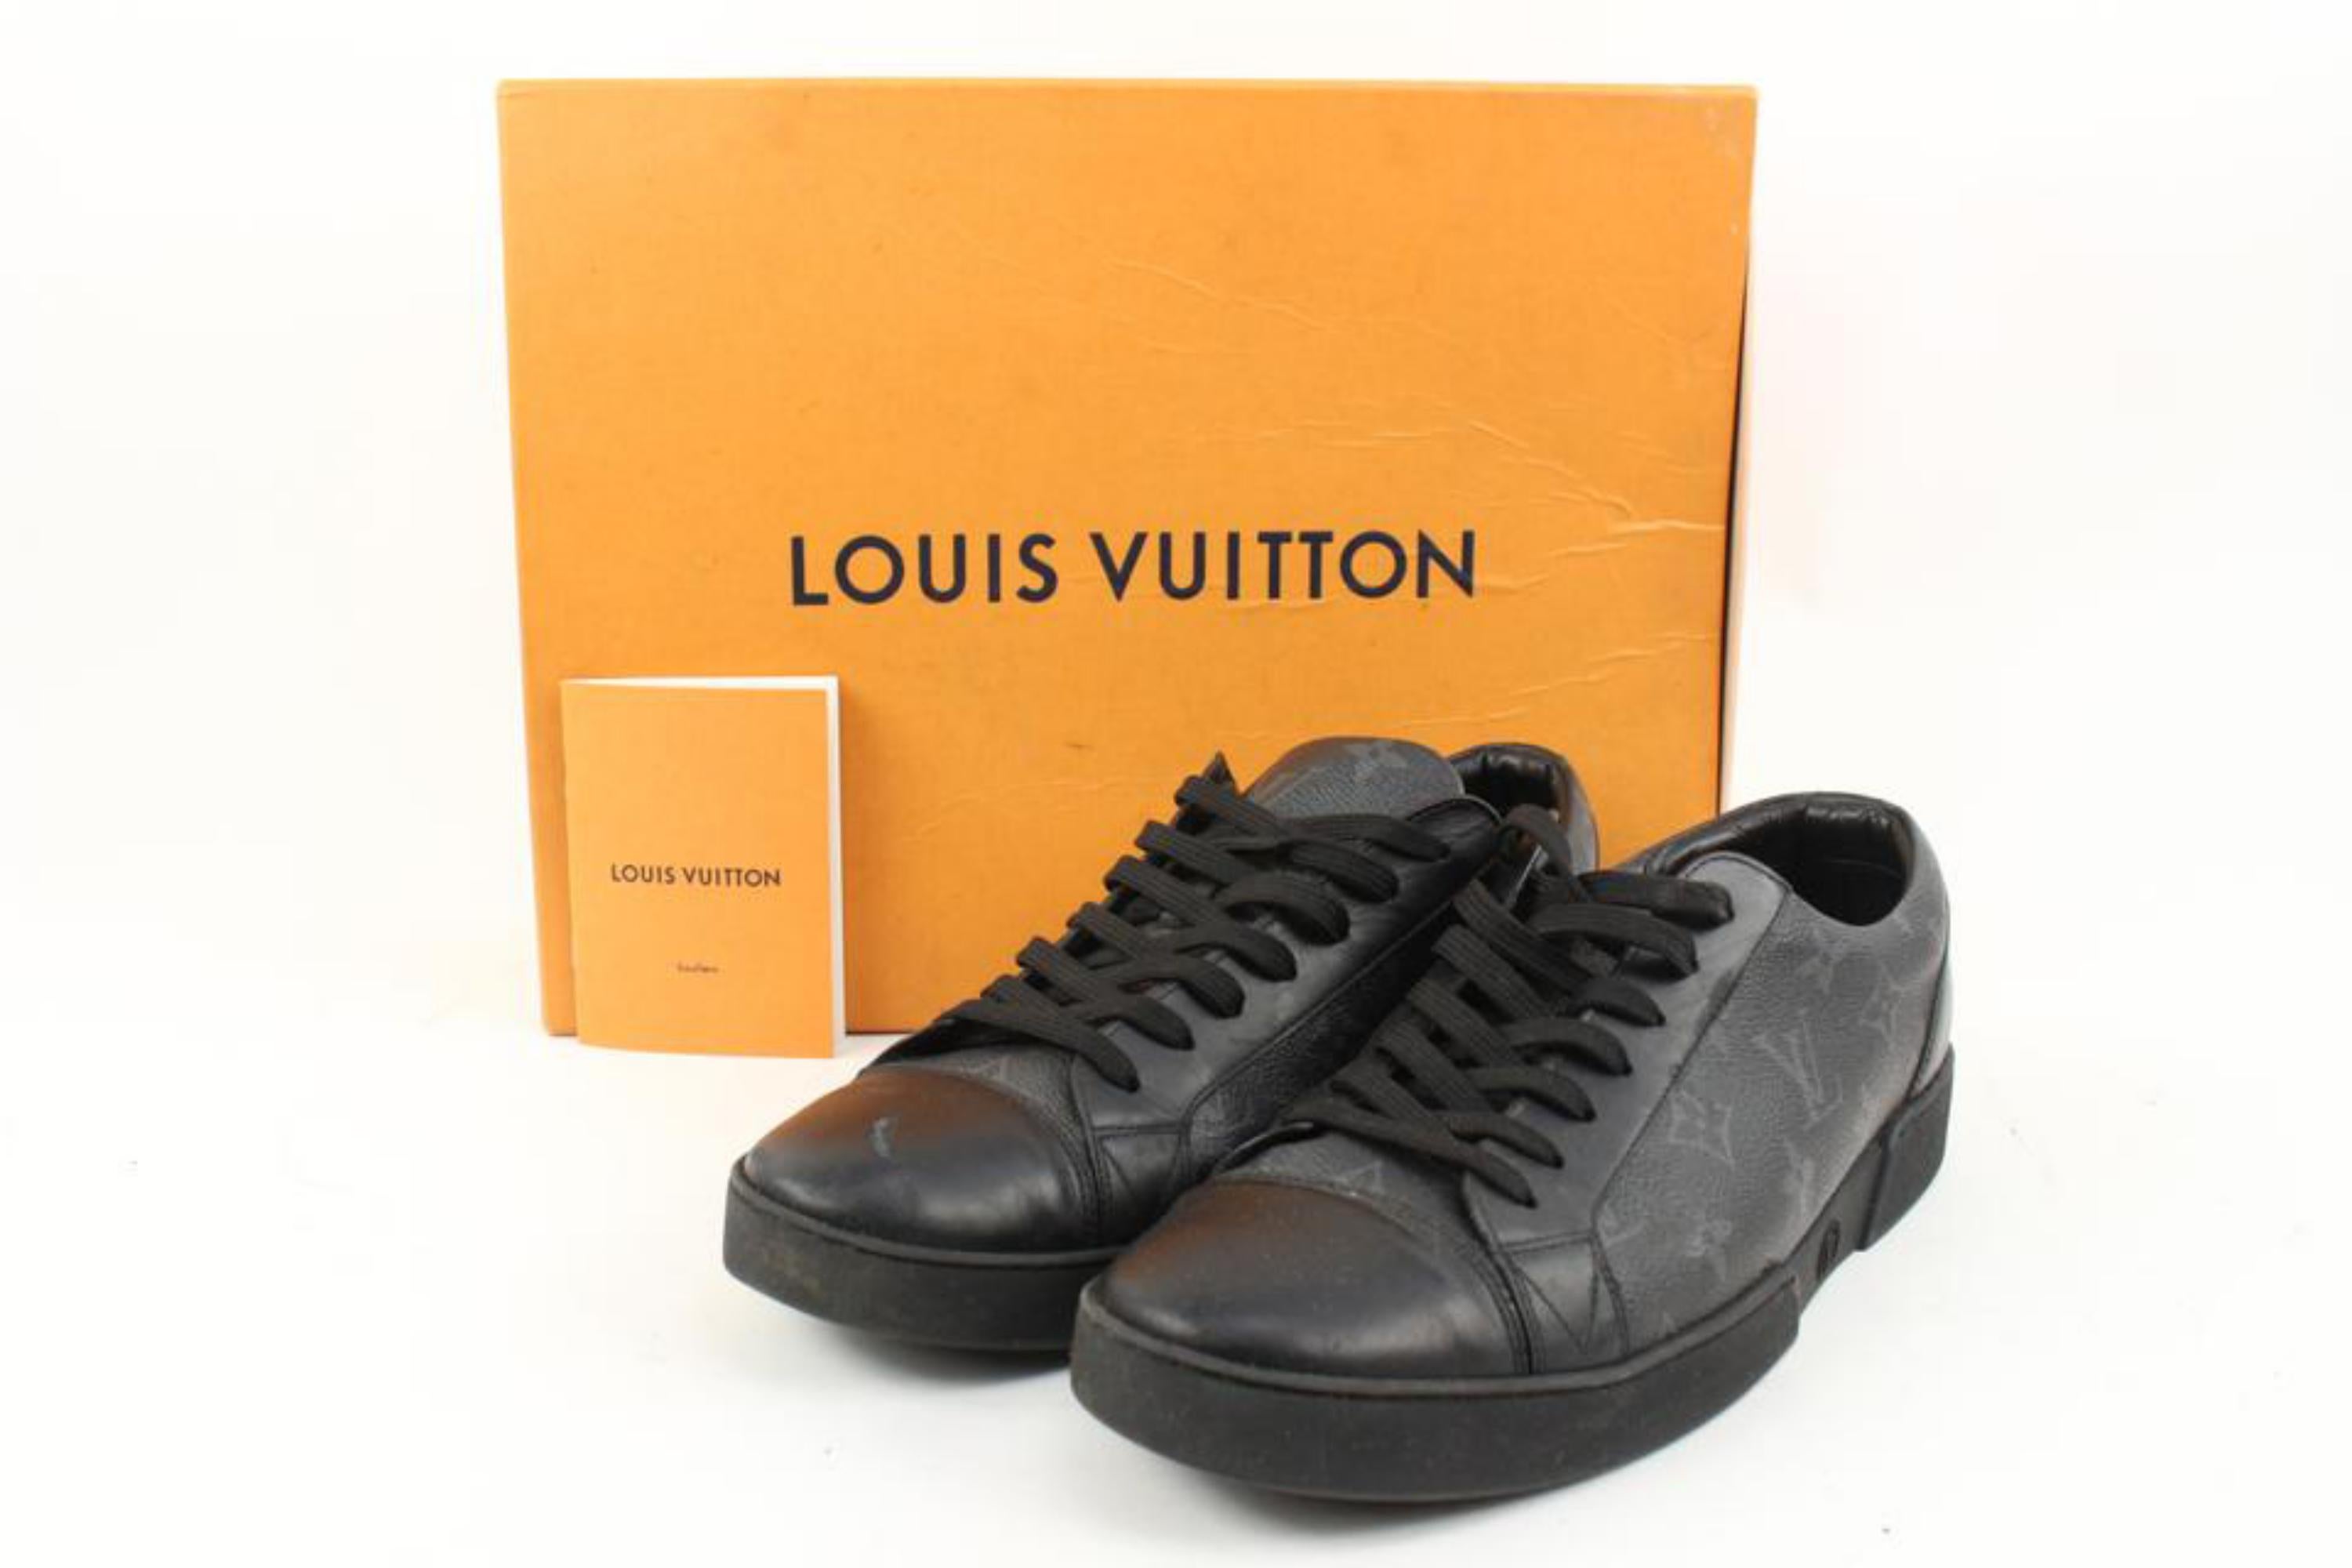 Louis Vuitton Men's 10 US Black Monogram Eclipse Luxembourg Sneaker 1lv215s
Date Code/Serial Number: MS0179
Made In: Italy
Measurements: Length:  11.8